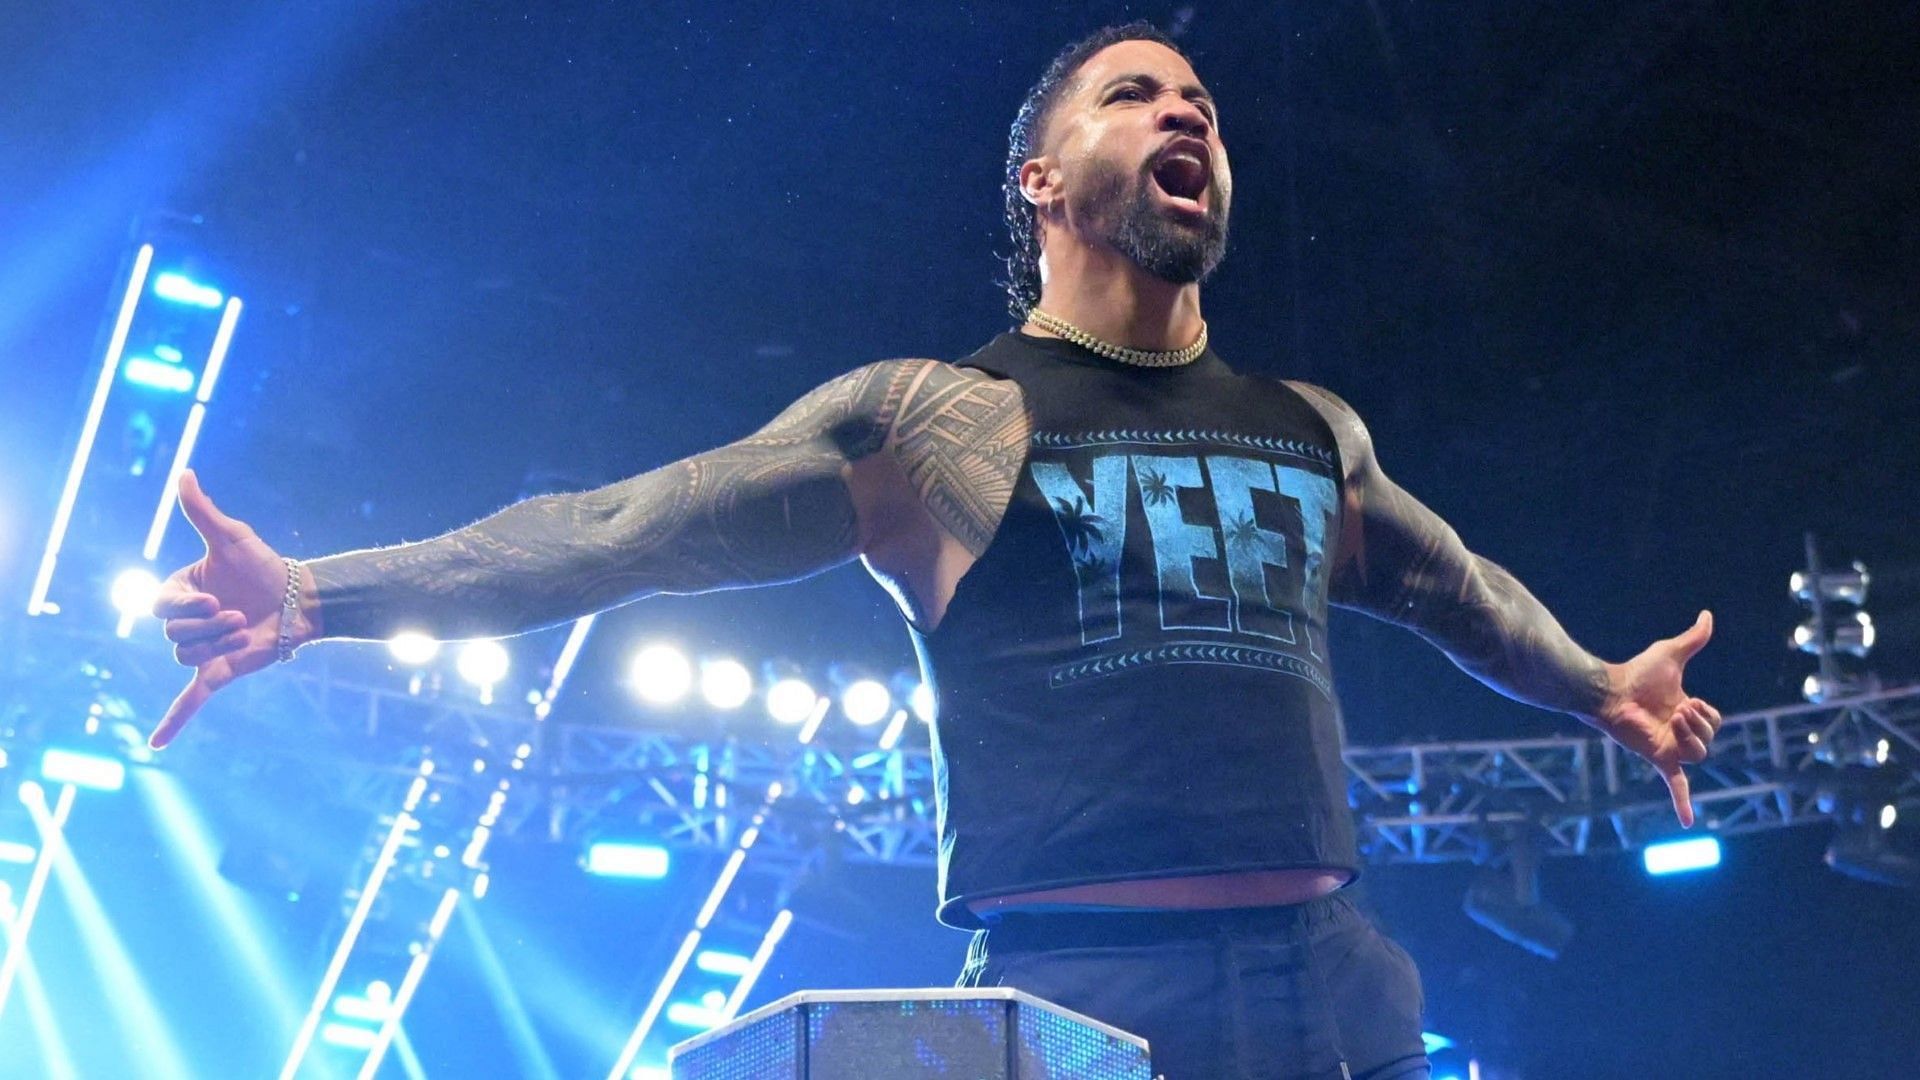 Jey Uso stands tall in the ring on WWE RAW